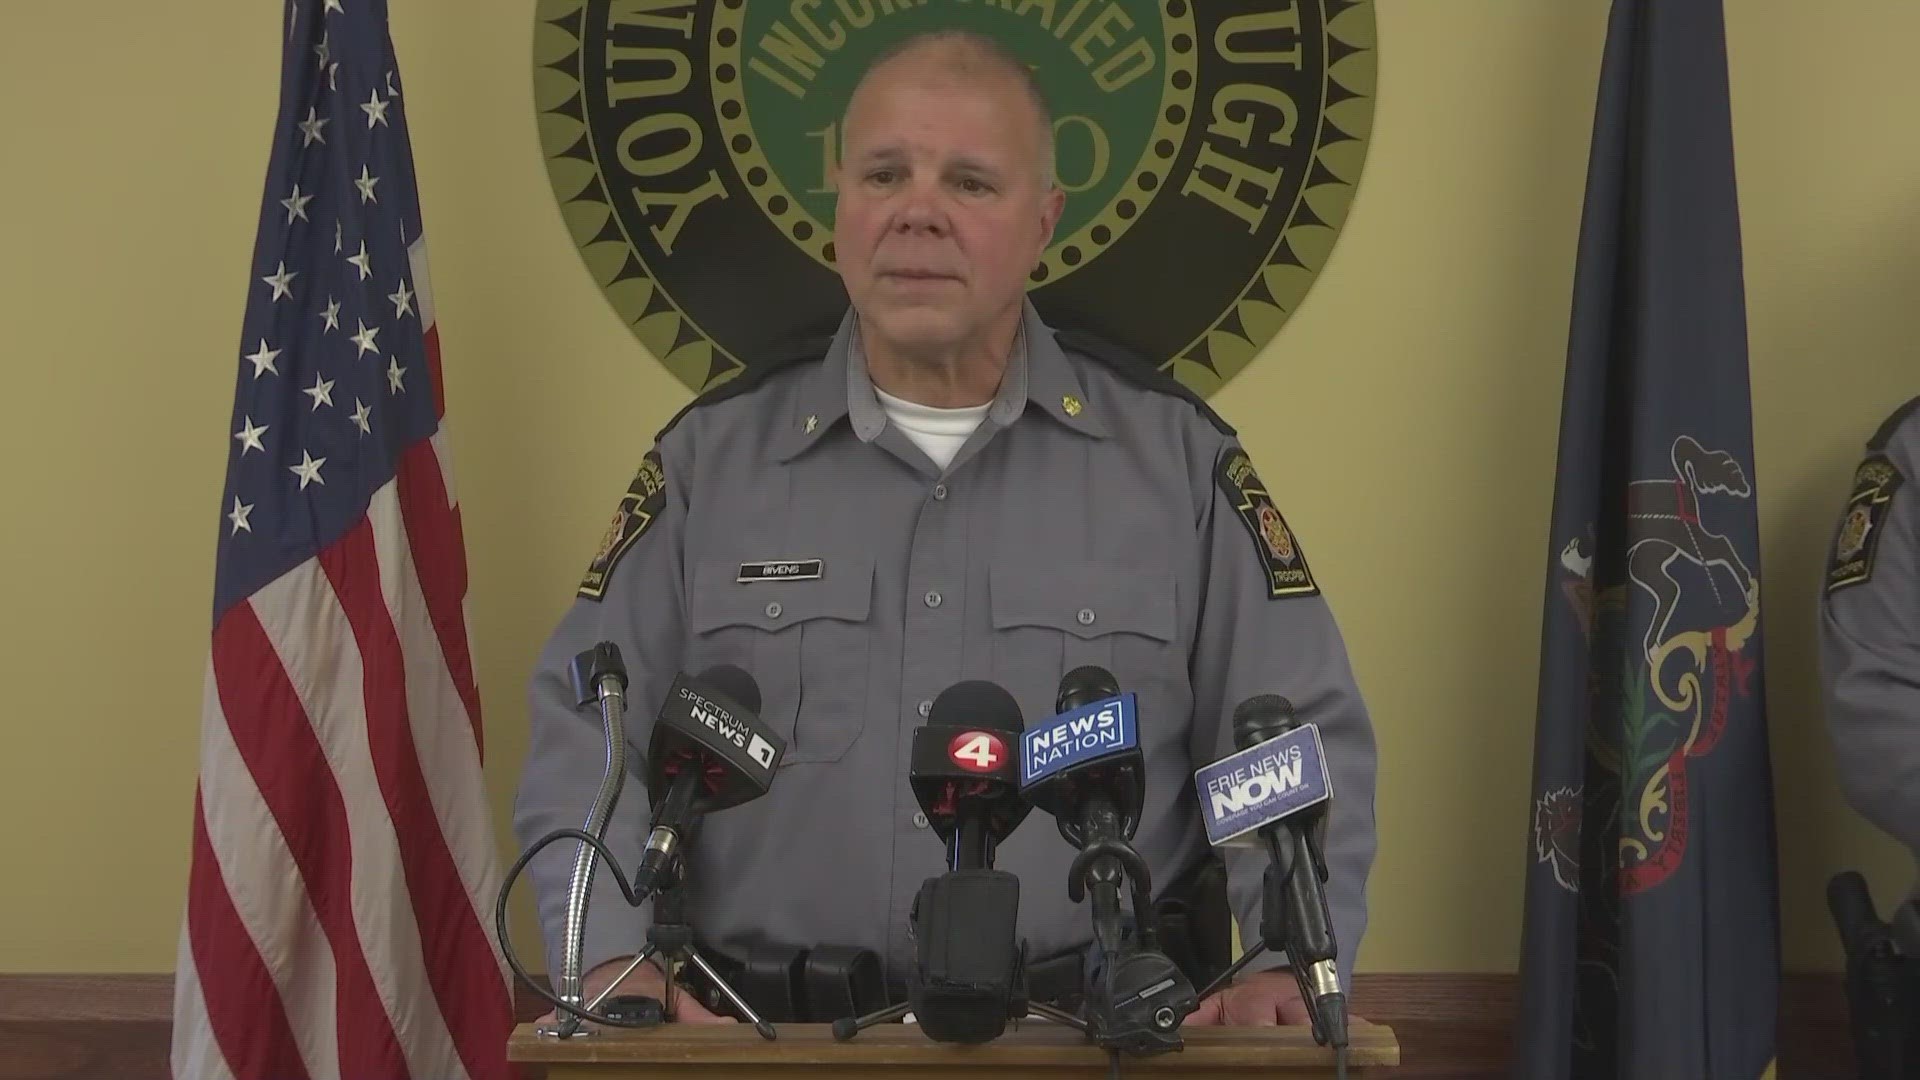 Michael Burham manhunt update, Day 9: Pennsylvania State Police scheduled a 4 p.m. news conference to provide an update on the manhunt for Michael Burham.